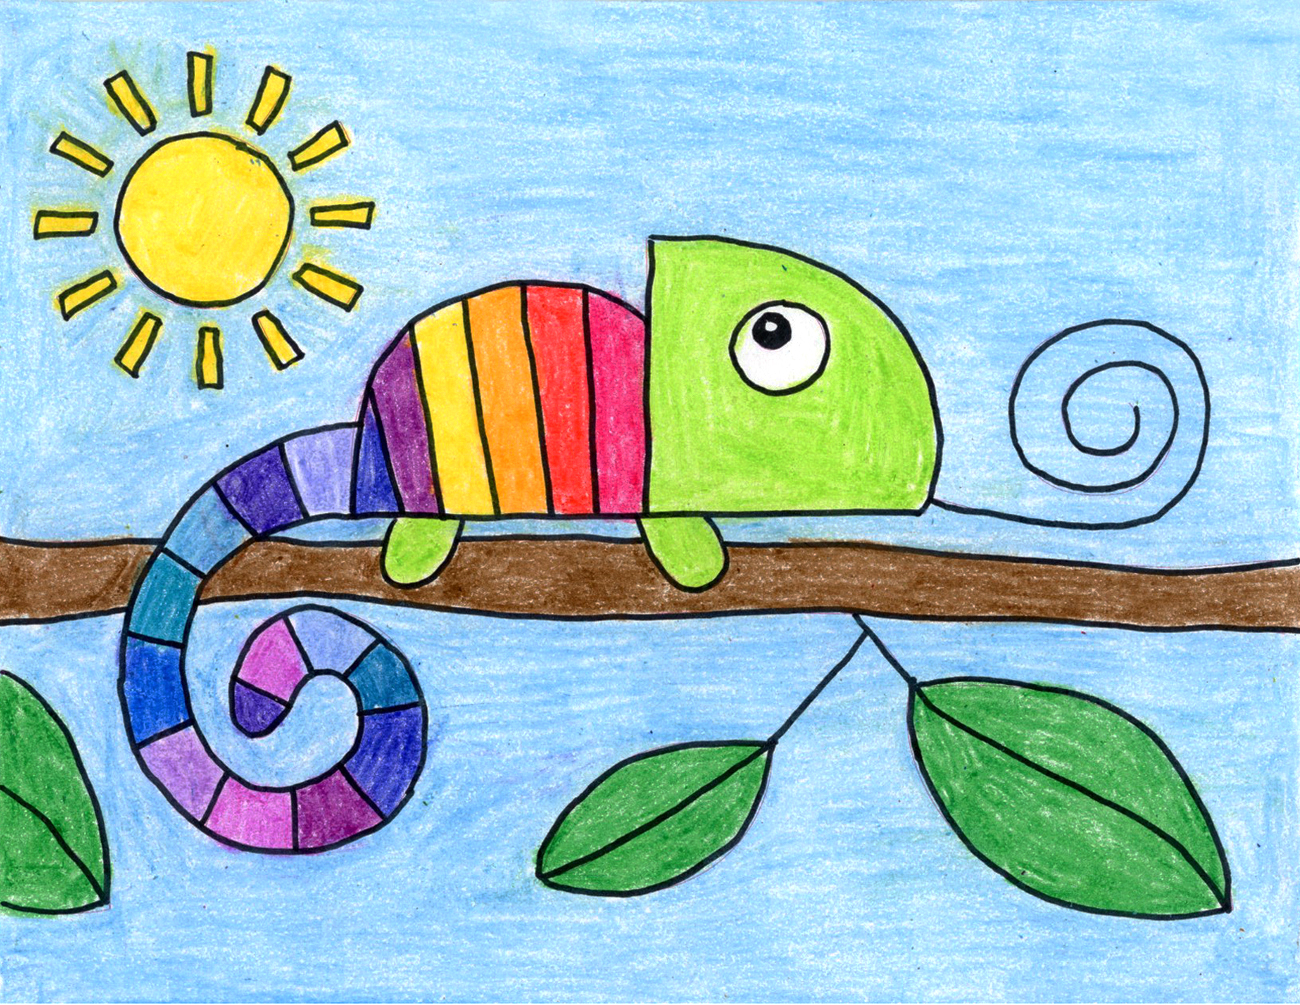 Easy How to Draw a Chameleon Tutorial and Chameleon Coloring Page